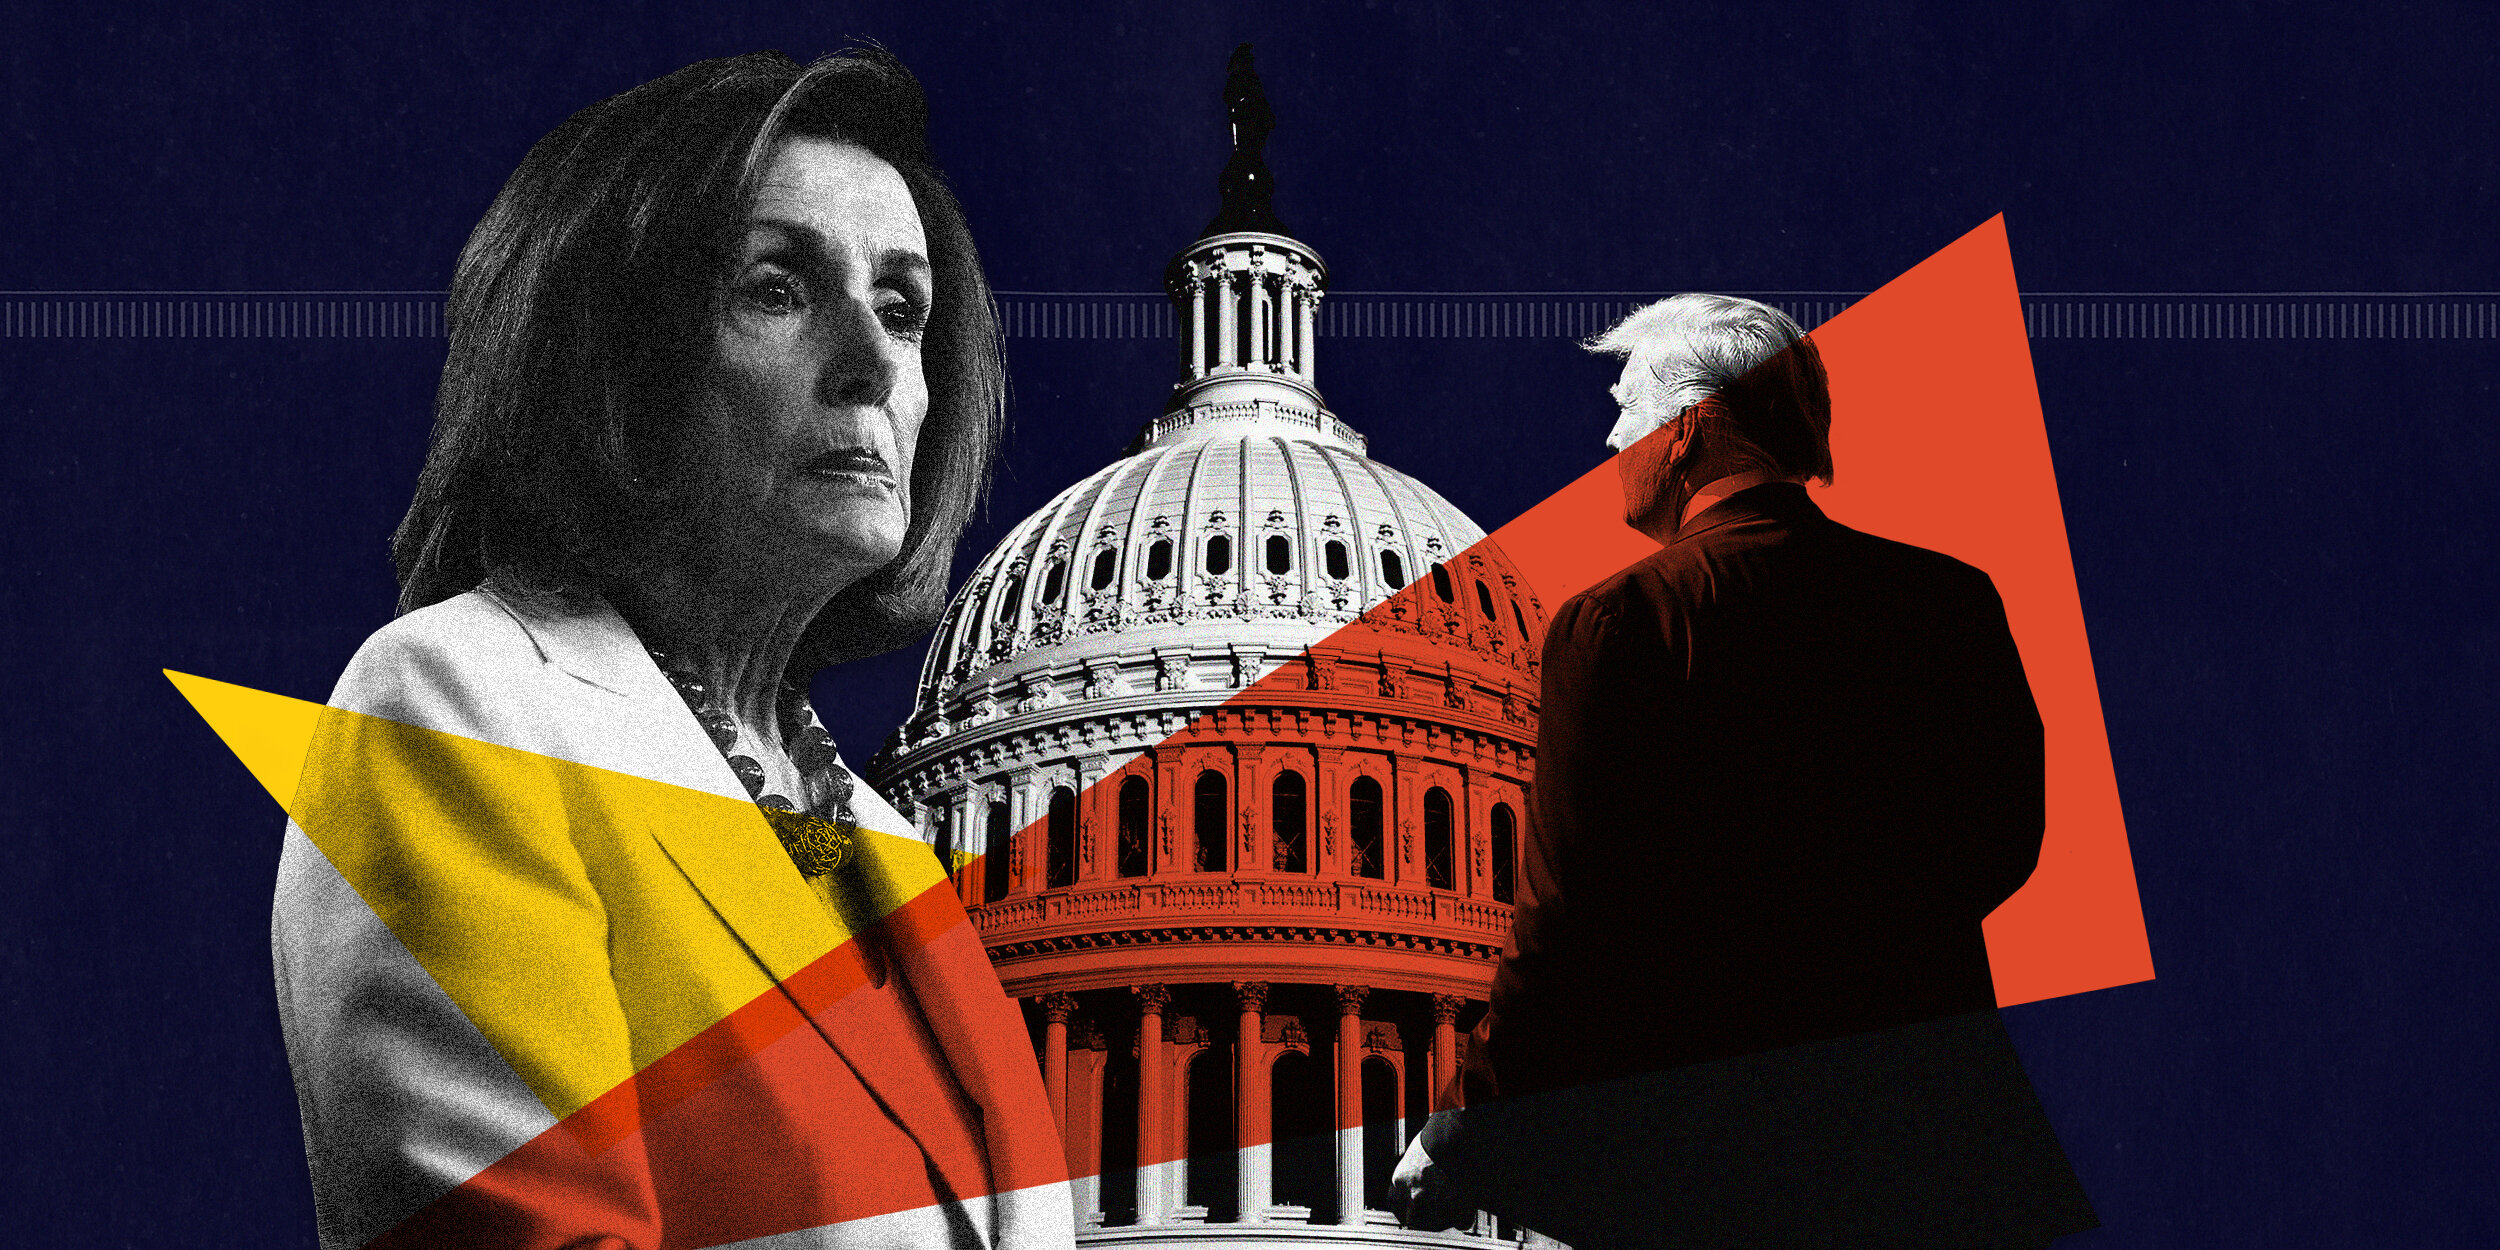   4 key questions about the Trump impeachment inquiry political fallout    AD:  Kara Haupt 